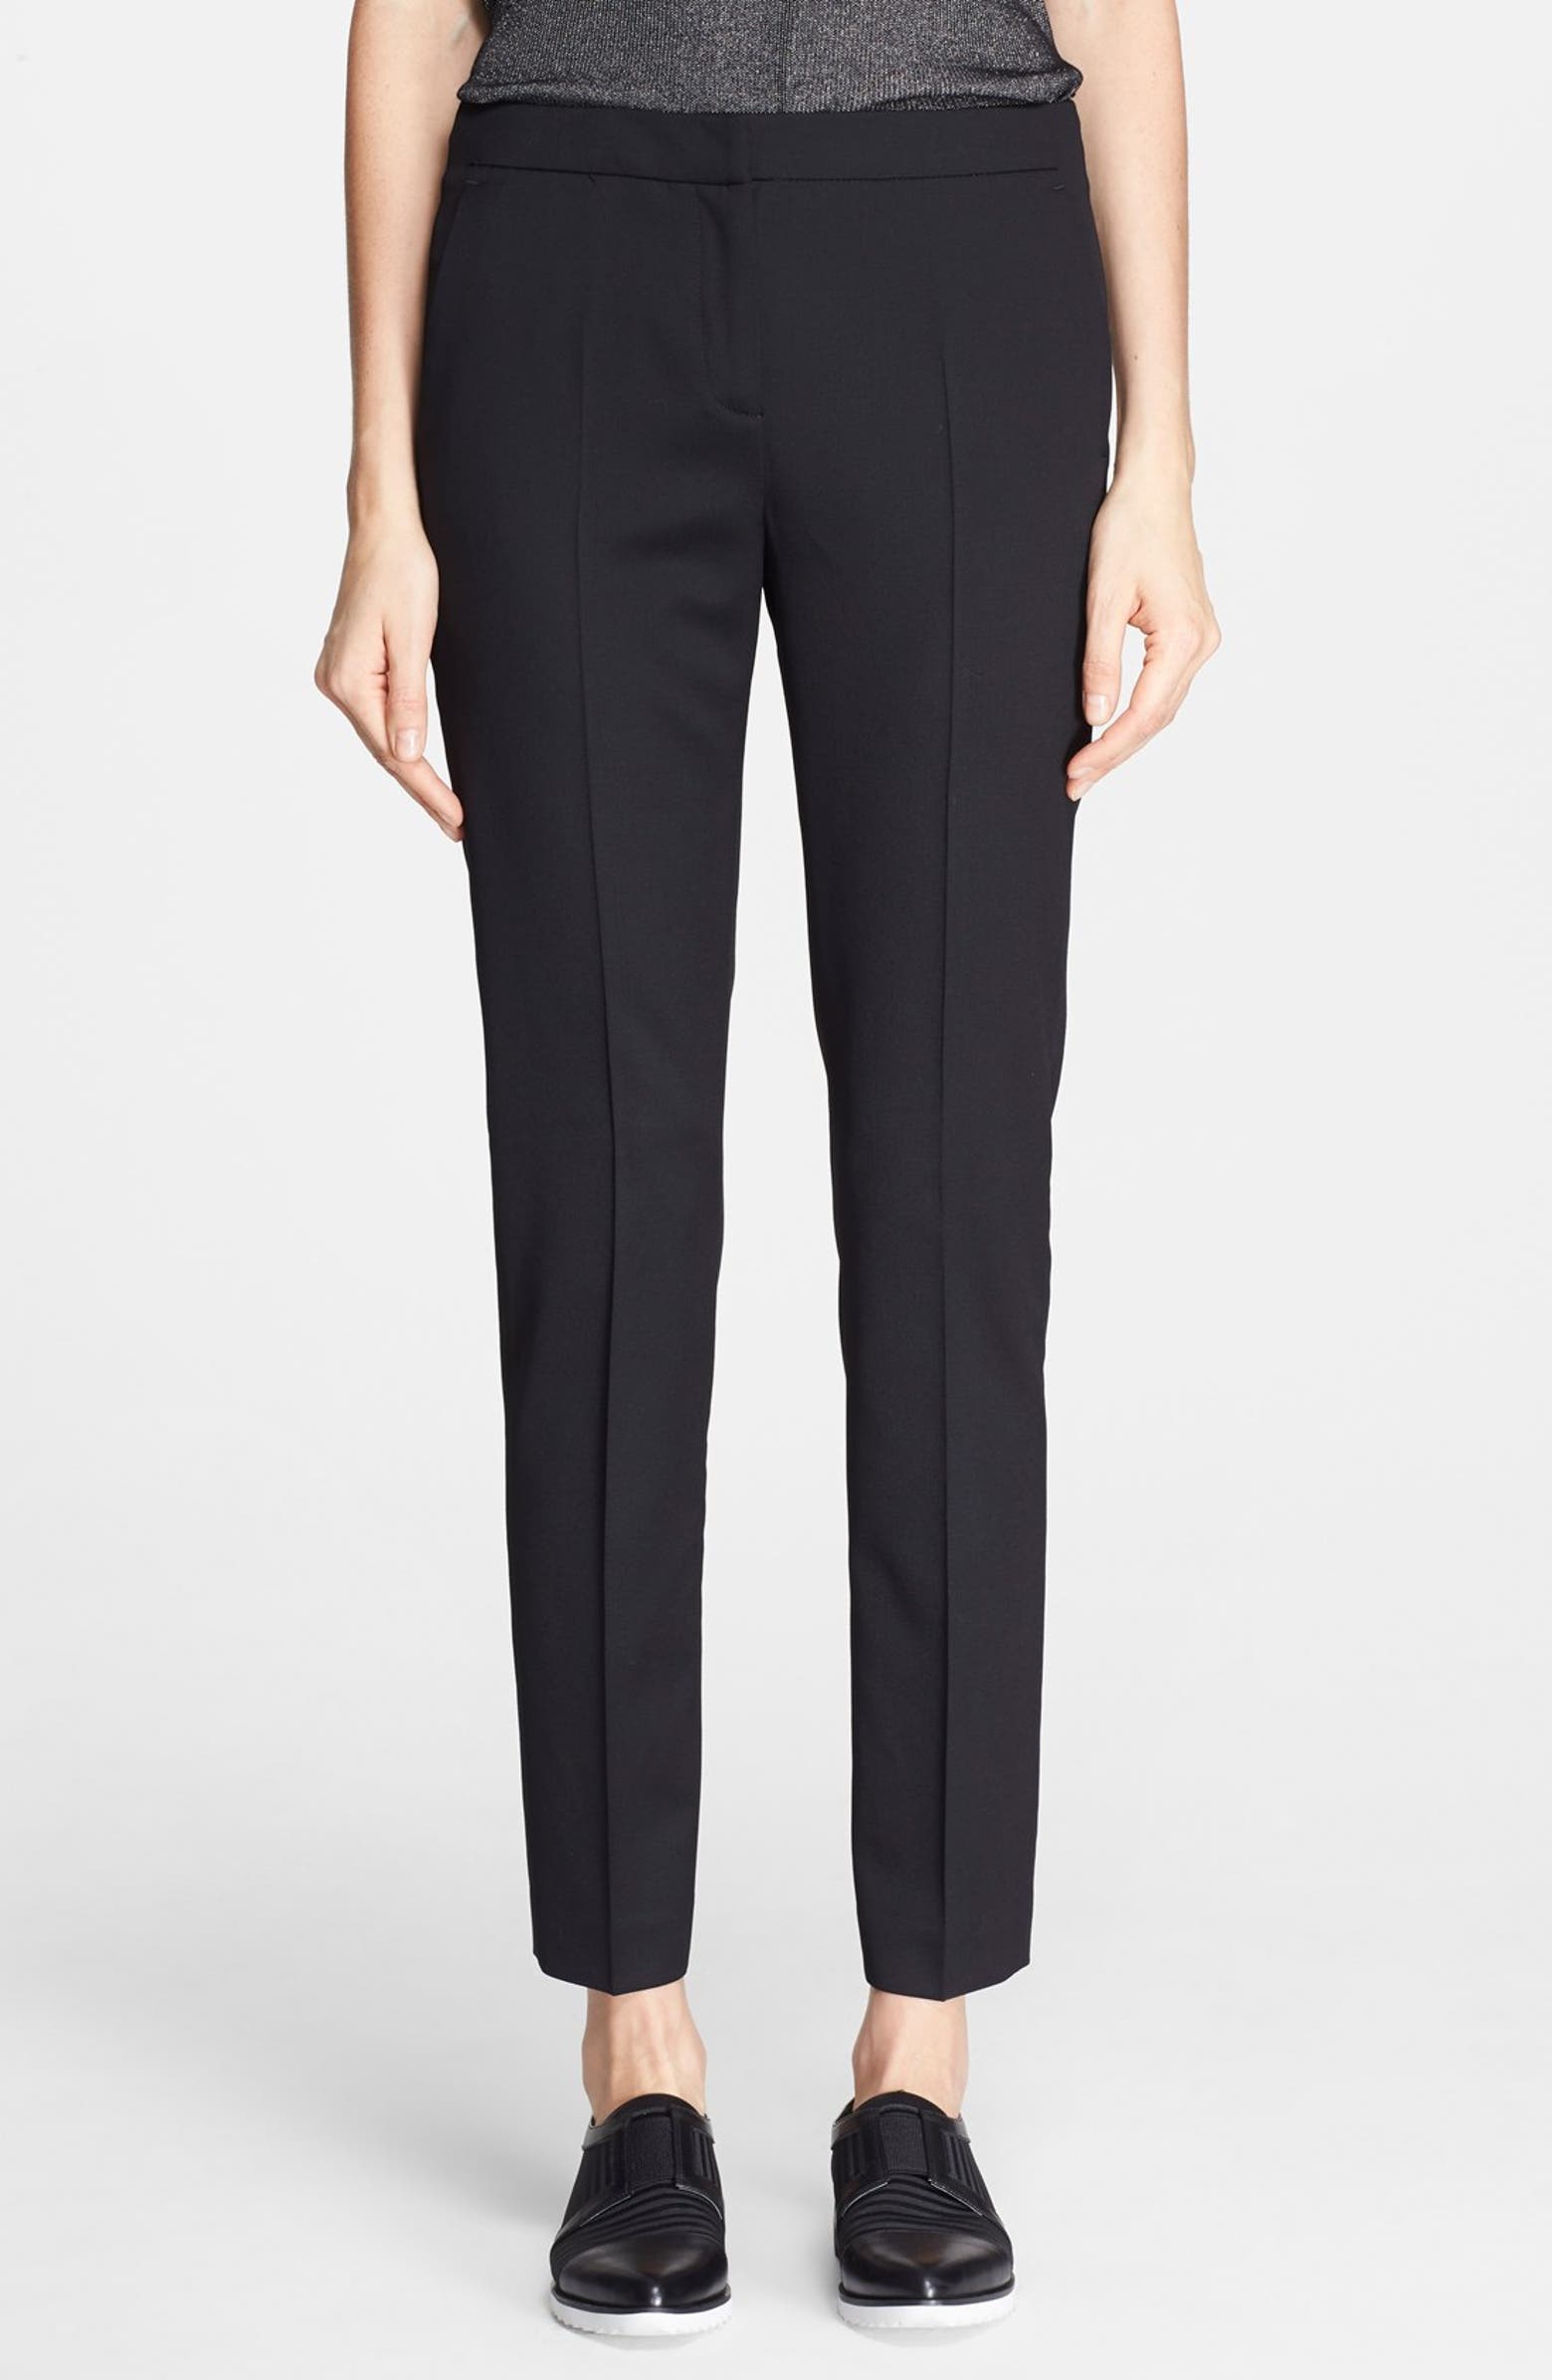 The Kooples Stretch Wool Trousers | Nordstrom